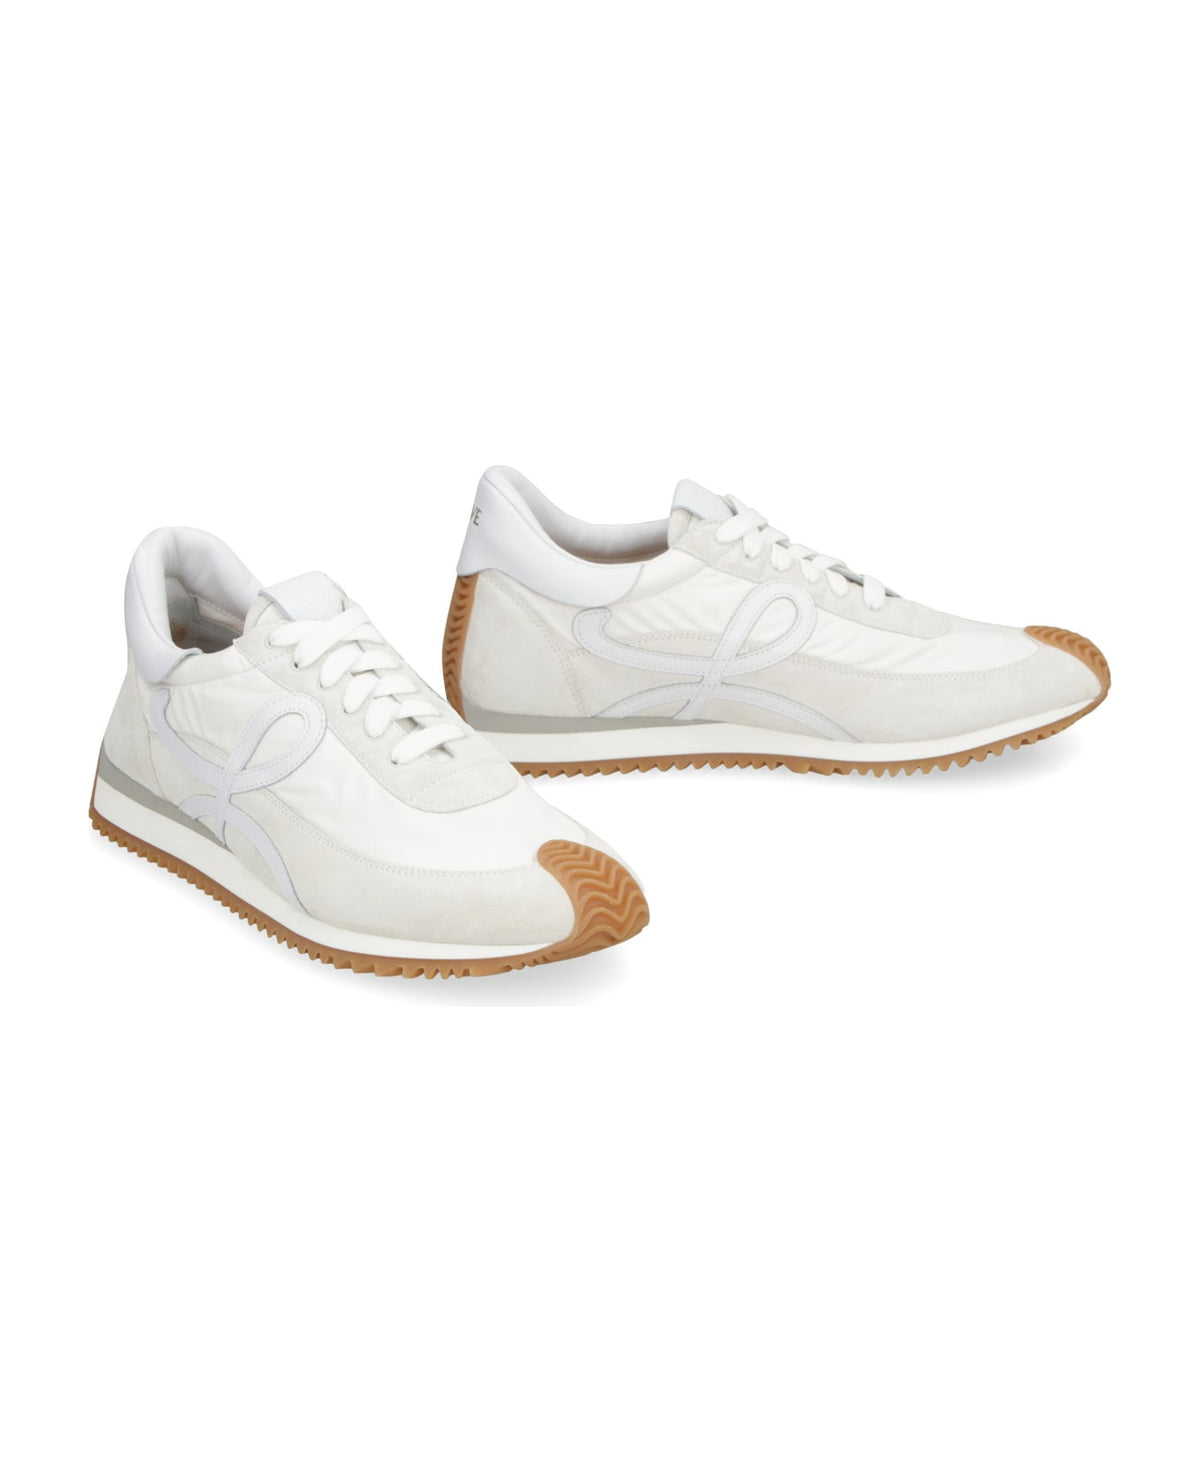 Flow Runner Nylon And Suede Sneakers